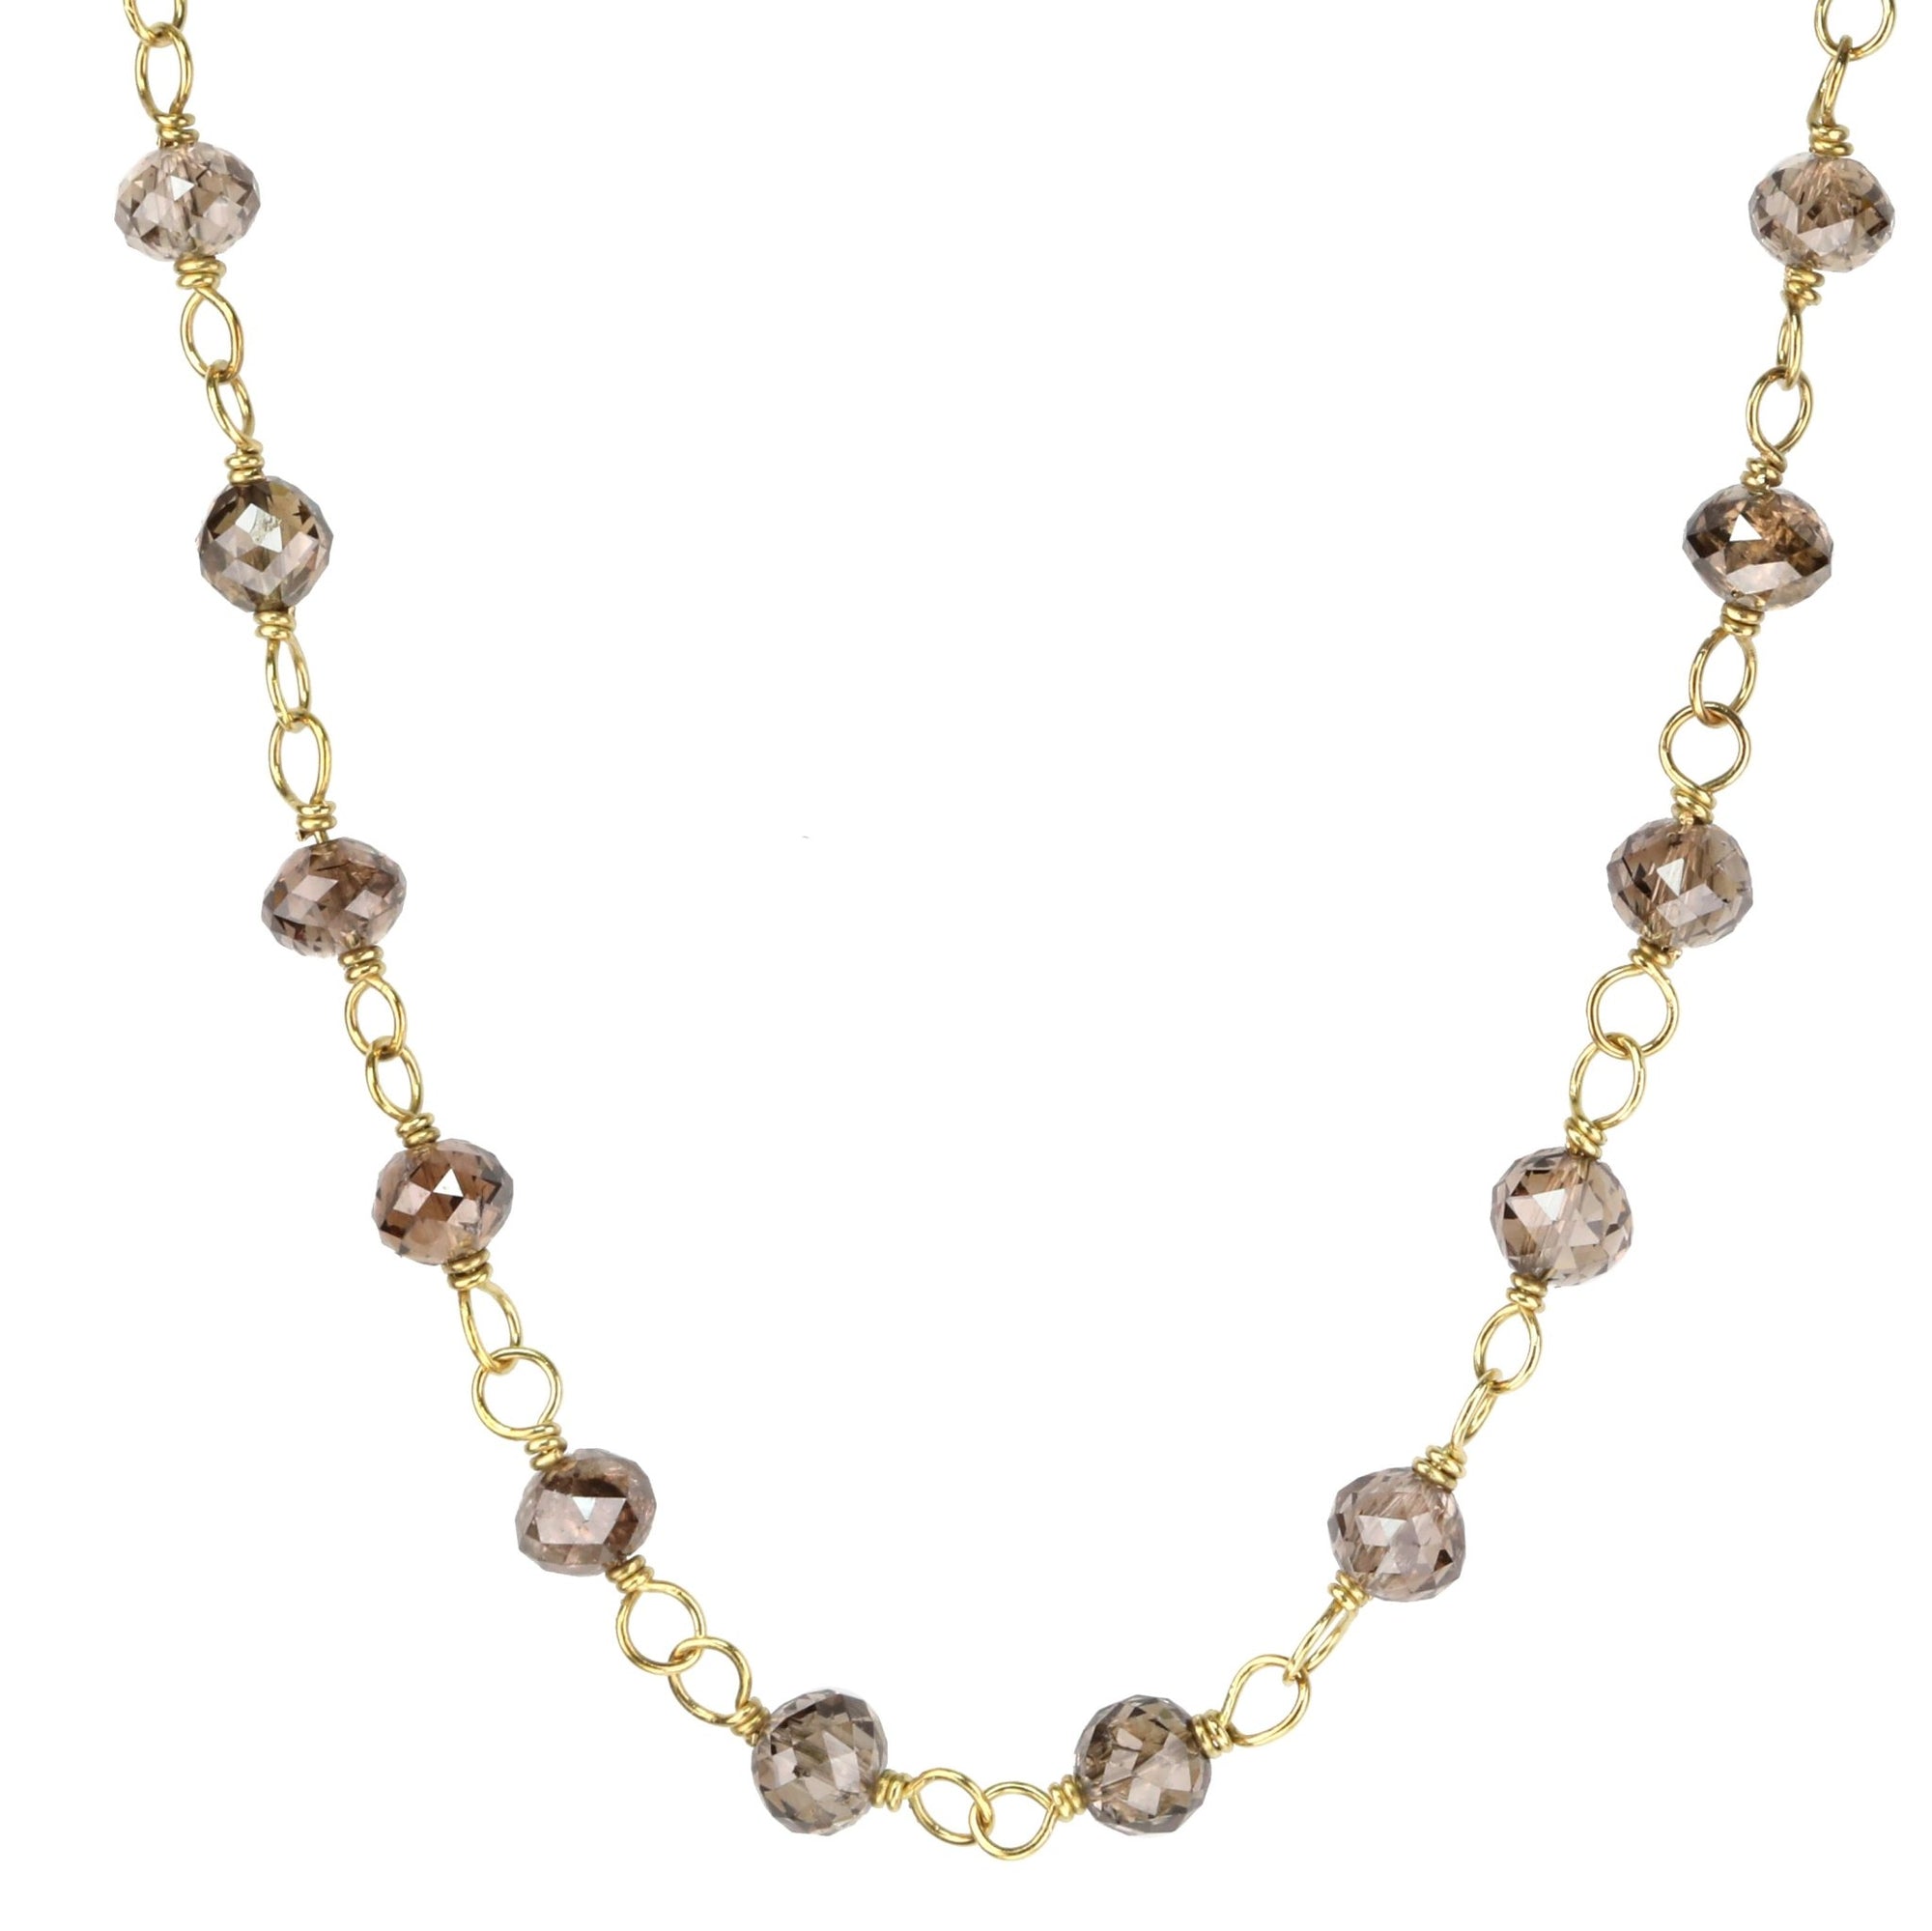 Faceted Cognac Diamond Beaded Necklace with 18K Gold Wire-Wrapping